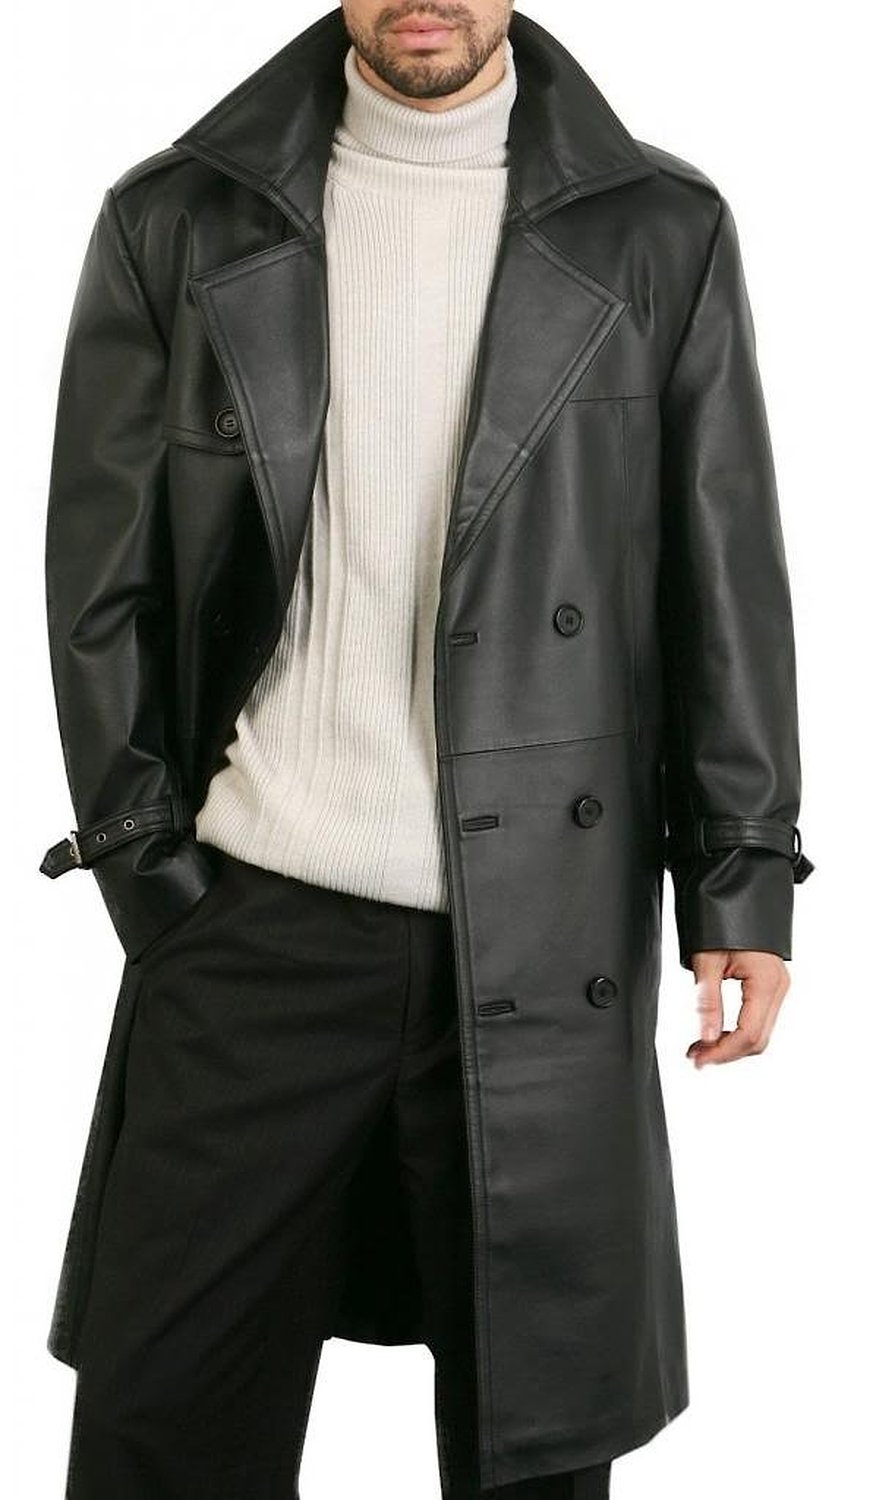 DashX Men's Classic Leather Trench/Long Coat